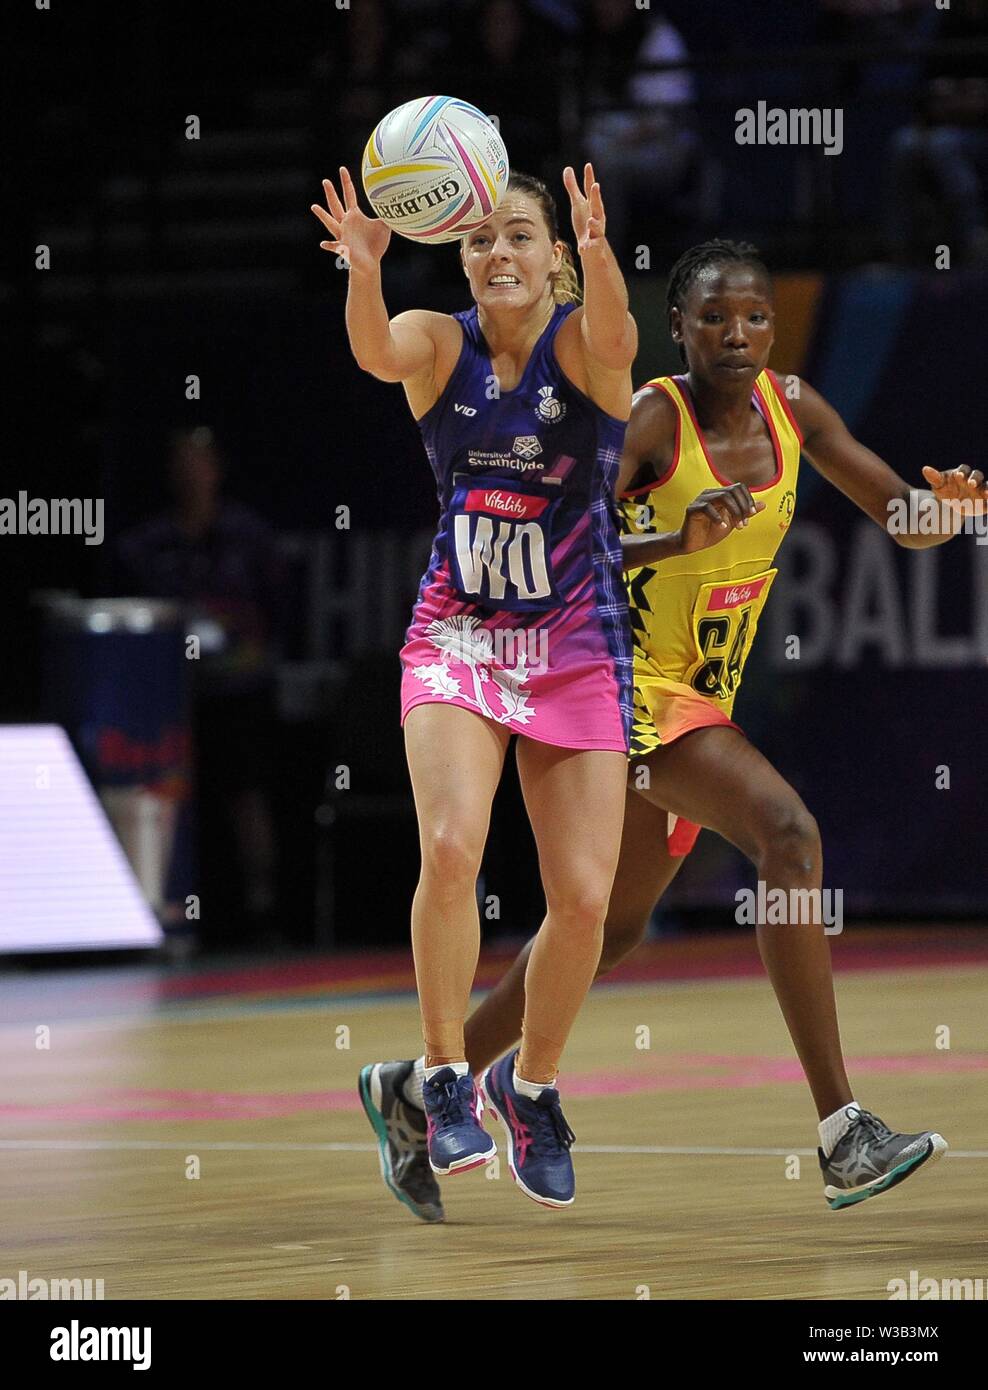 Liverpool, UK. 14 July 2019. Kelly Boyle (Scotland) catches during the Preliminary game between Uganda and Scotland at the Netball World Cup. M and S arena, Liverpool. Merseyside. UK. Credit Garry Bowdenh/SIP photo agency/Alamy live news. Stock Photo